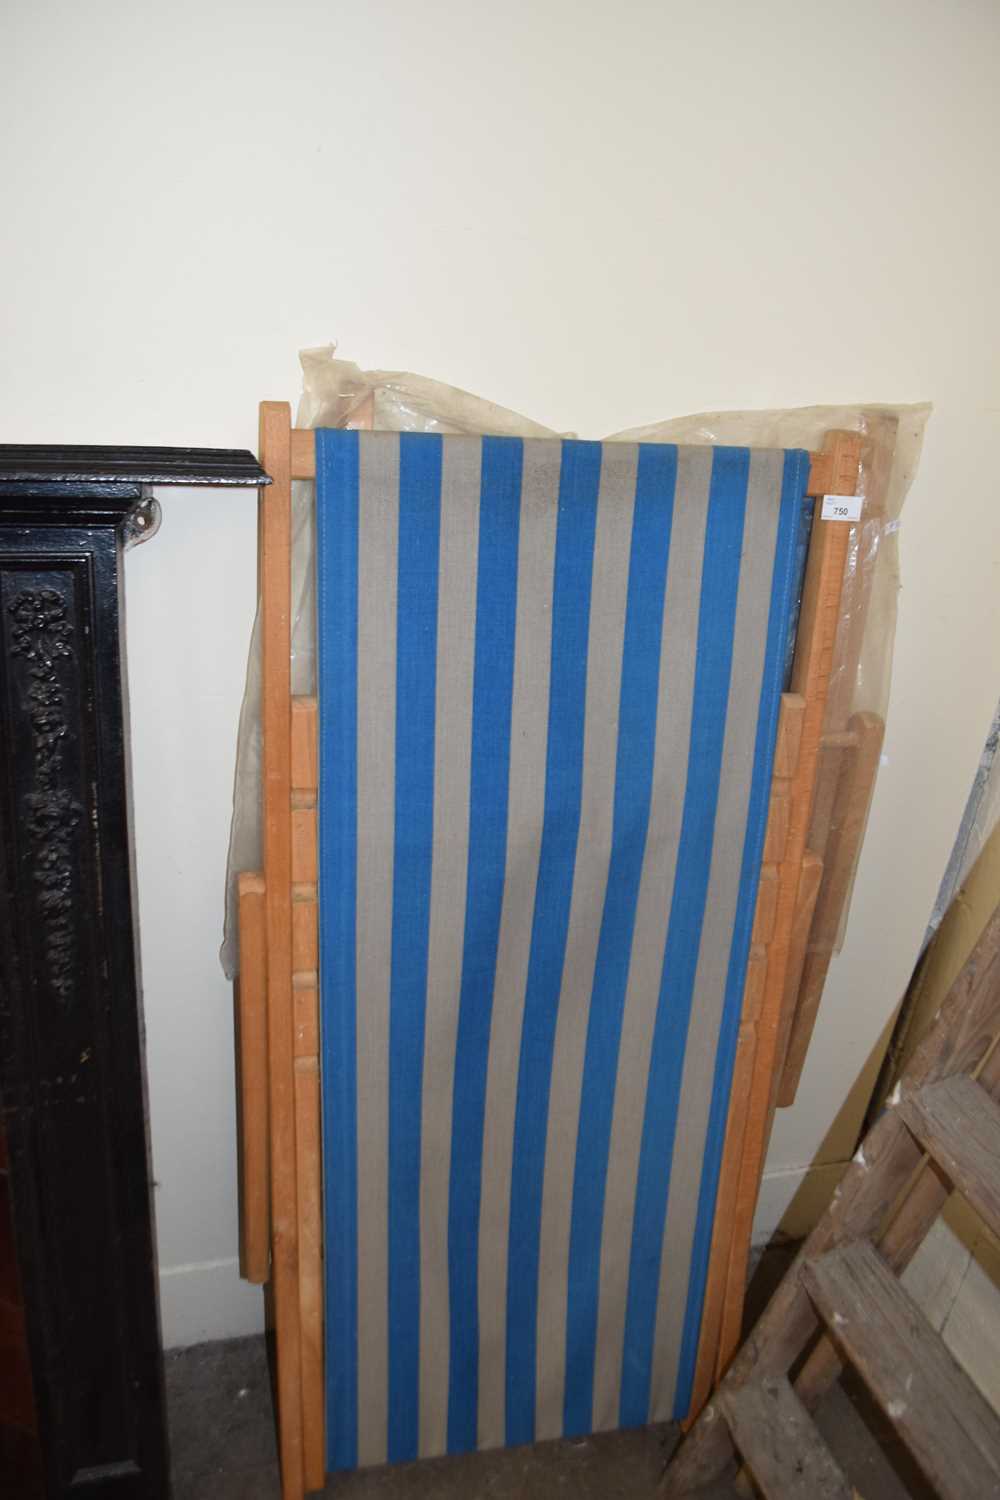 Pair of blue and grey striped deckchairs